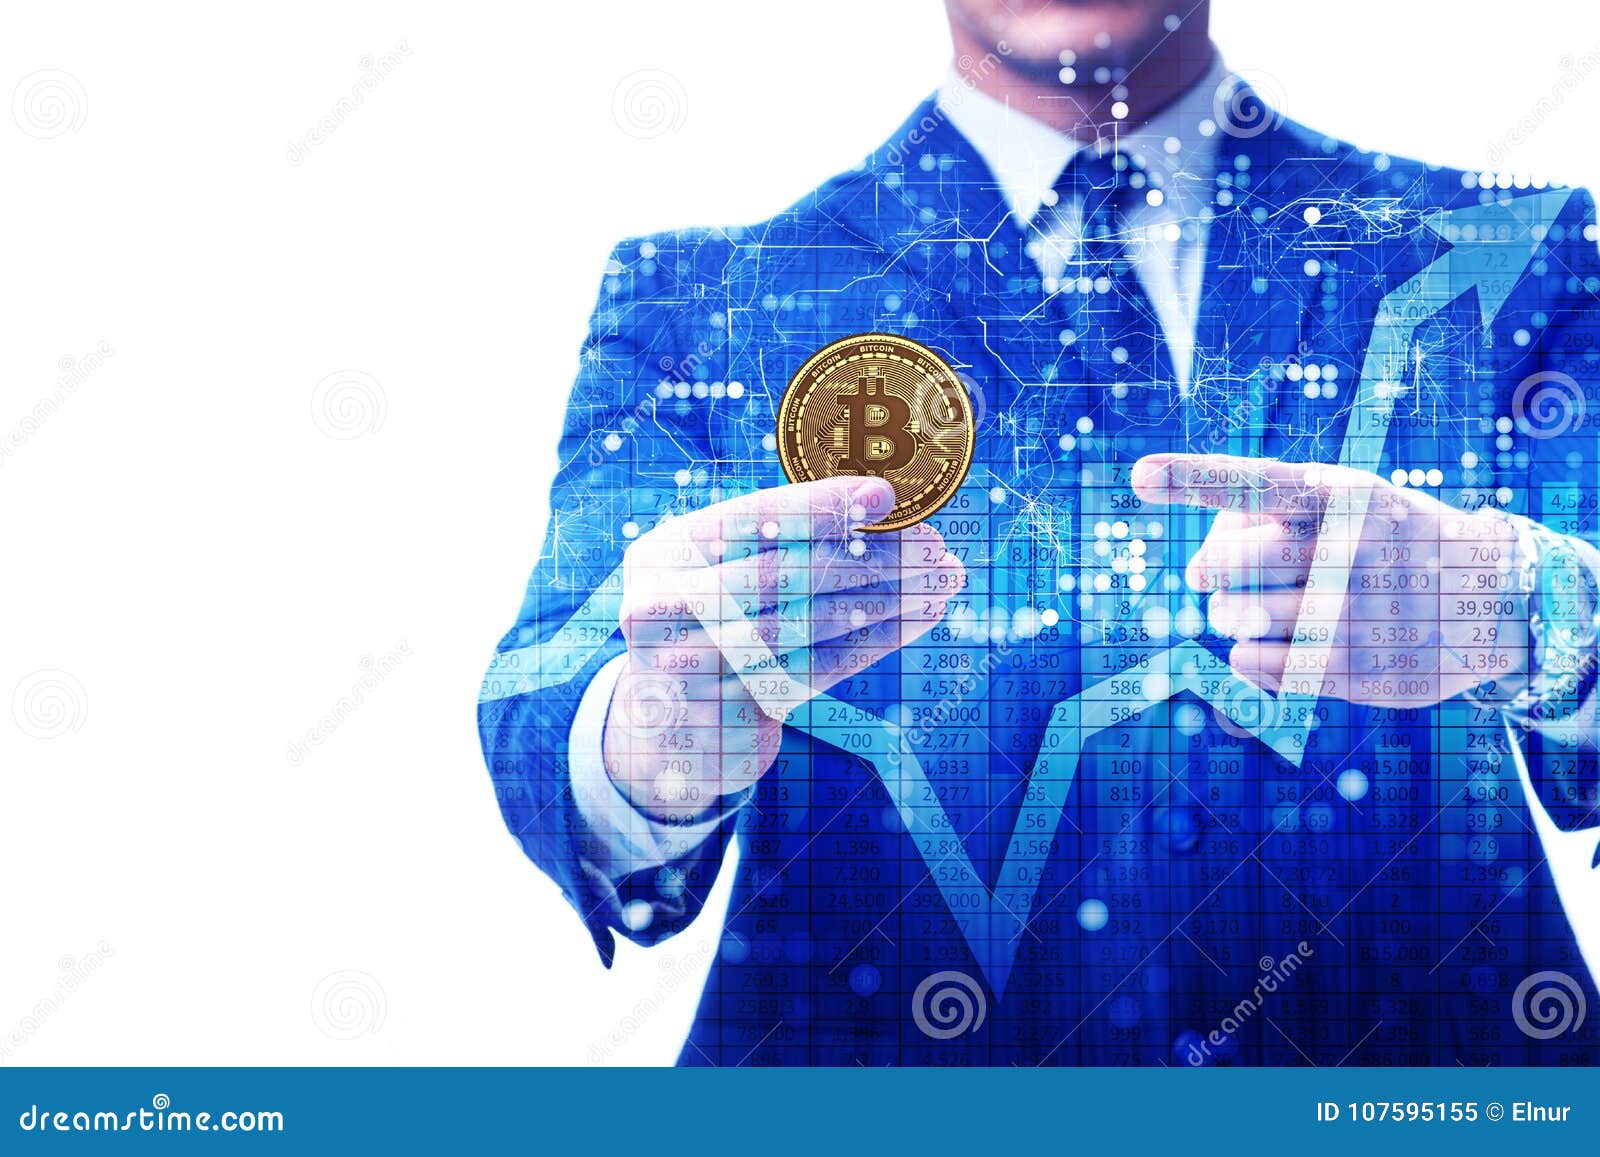 The Businessman In Bitcoin Price Increase Concept Stock Image - Image of bubble, buying: 107595155